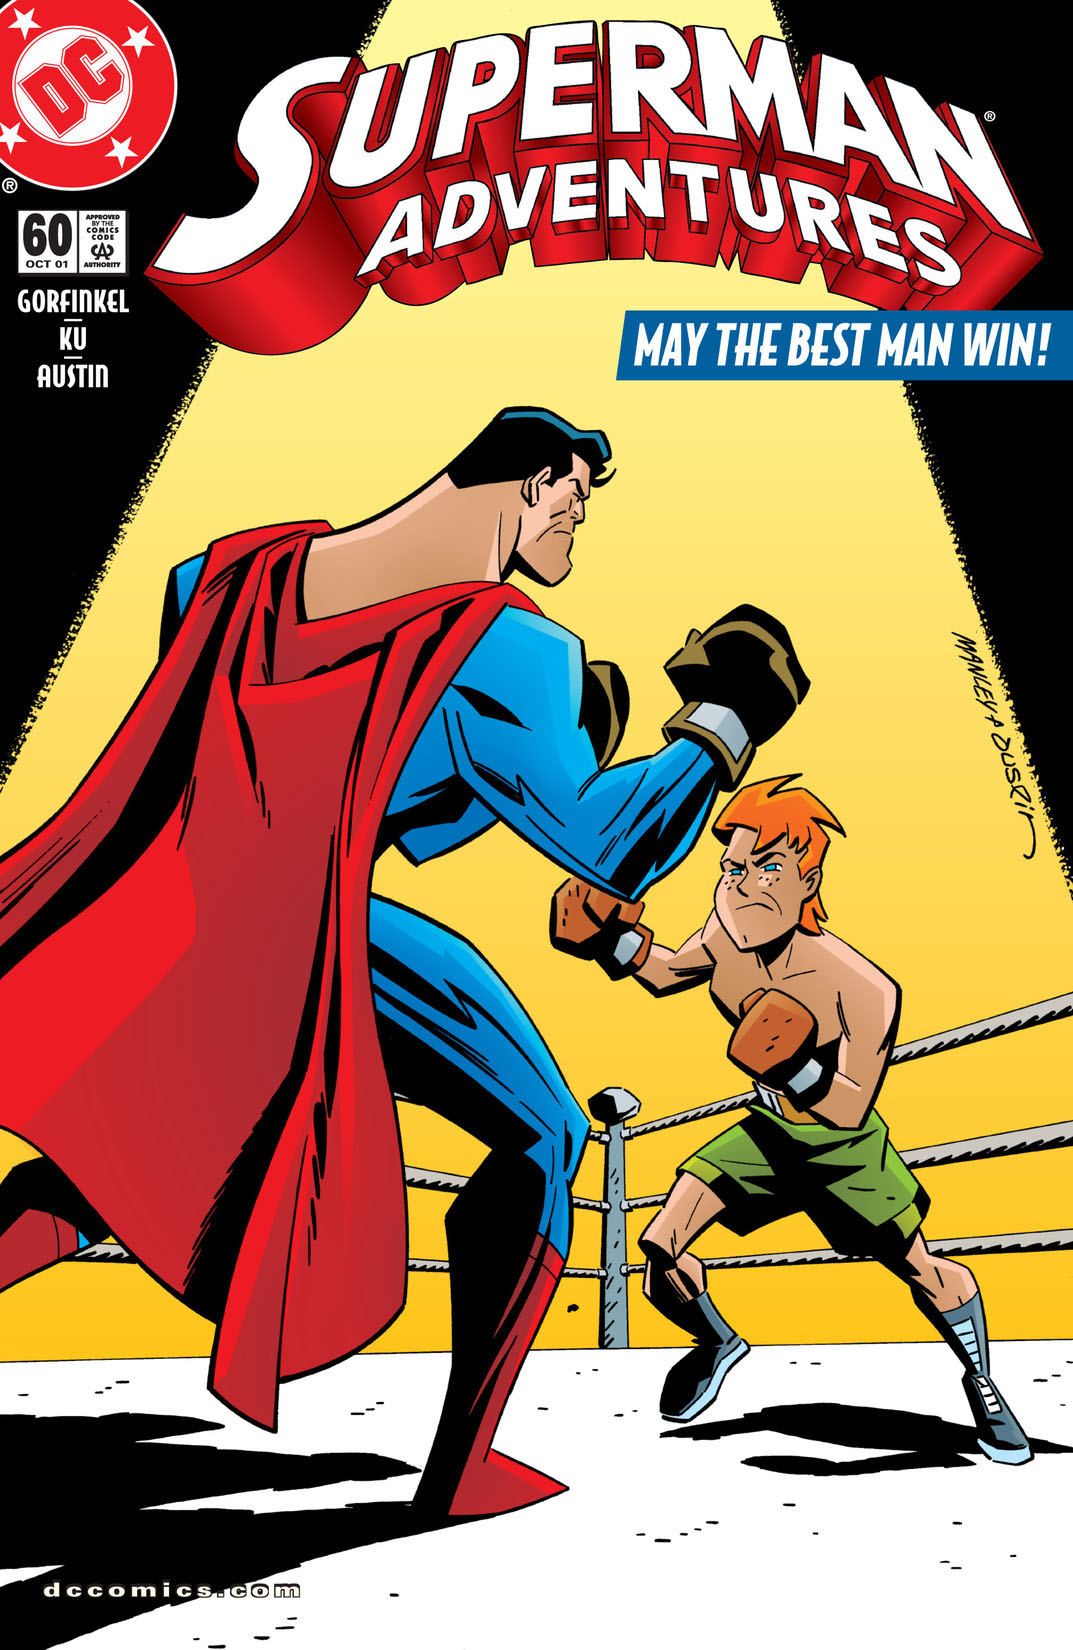 Superman Adventures #60 preview images